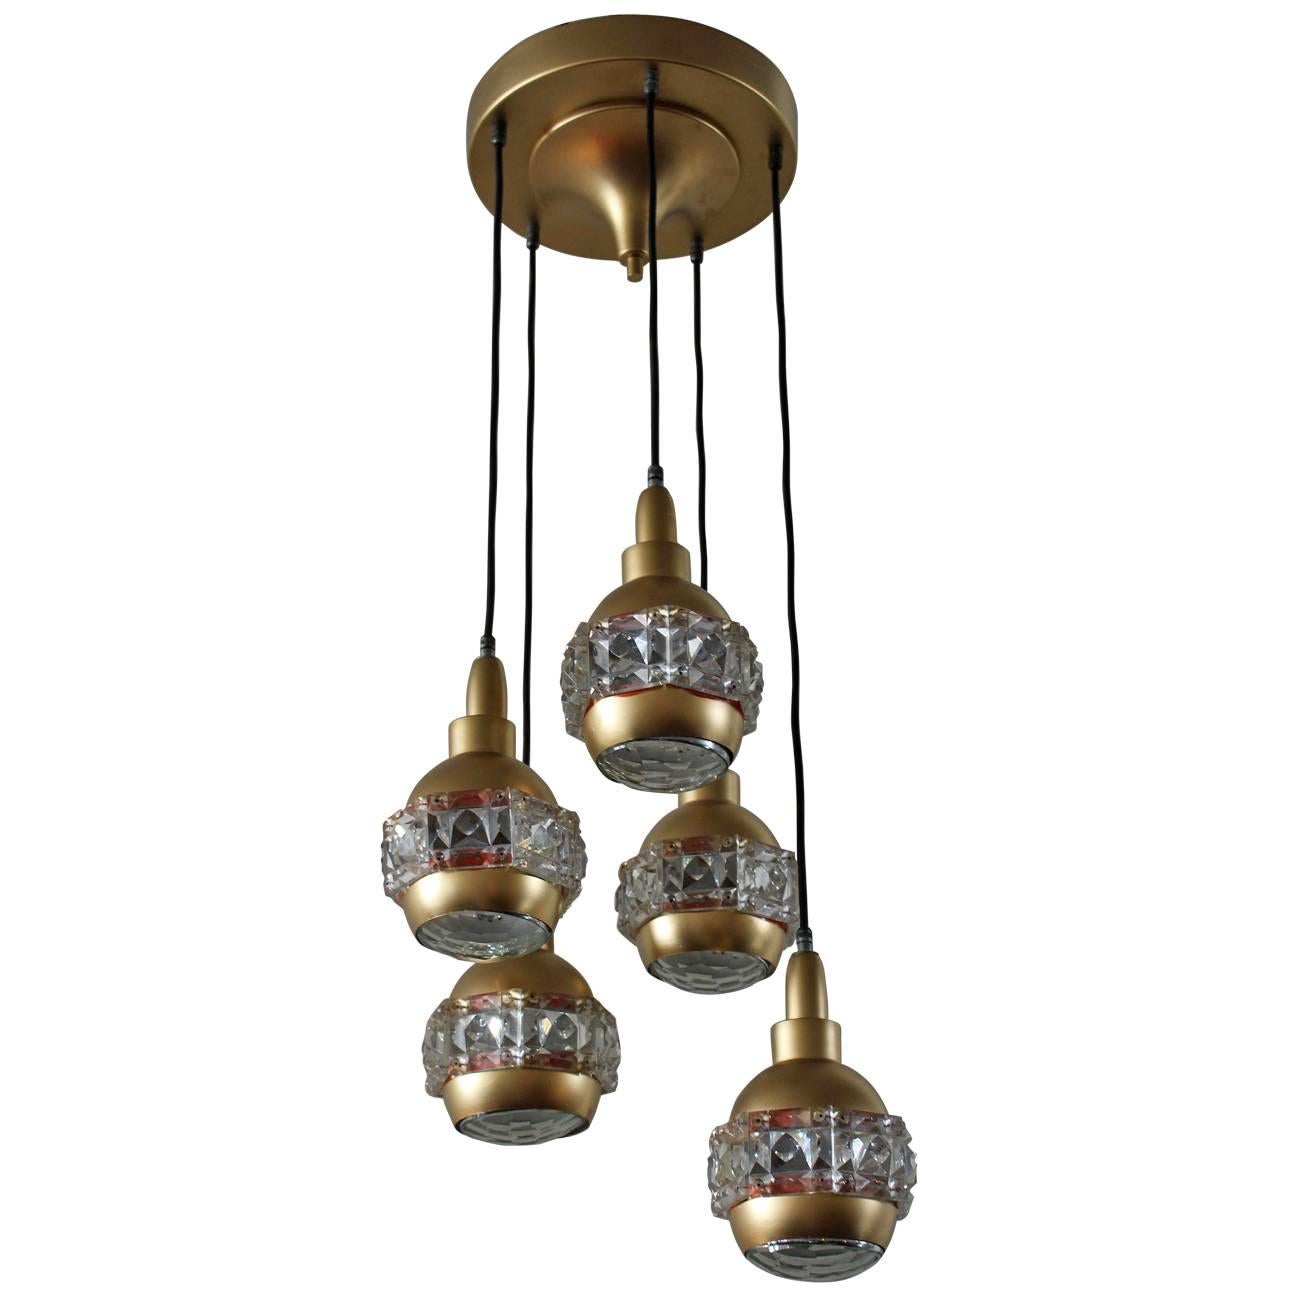 Italian Midcentury Chandelier Attributed to O'luce